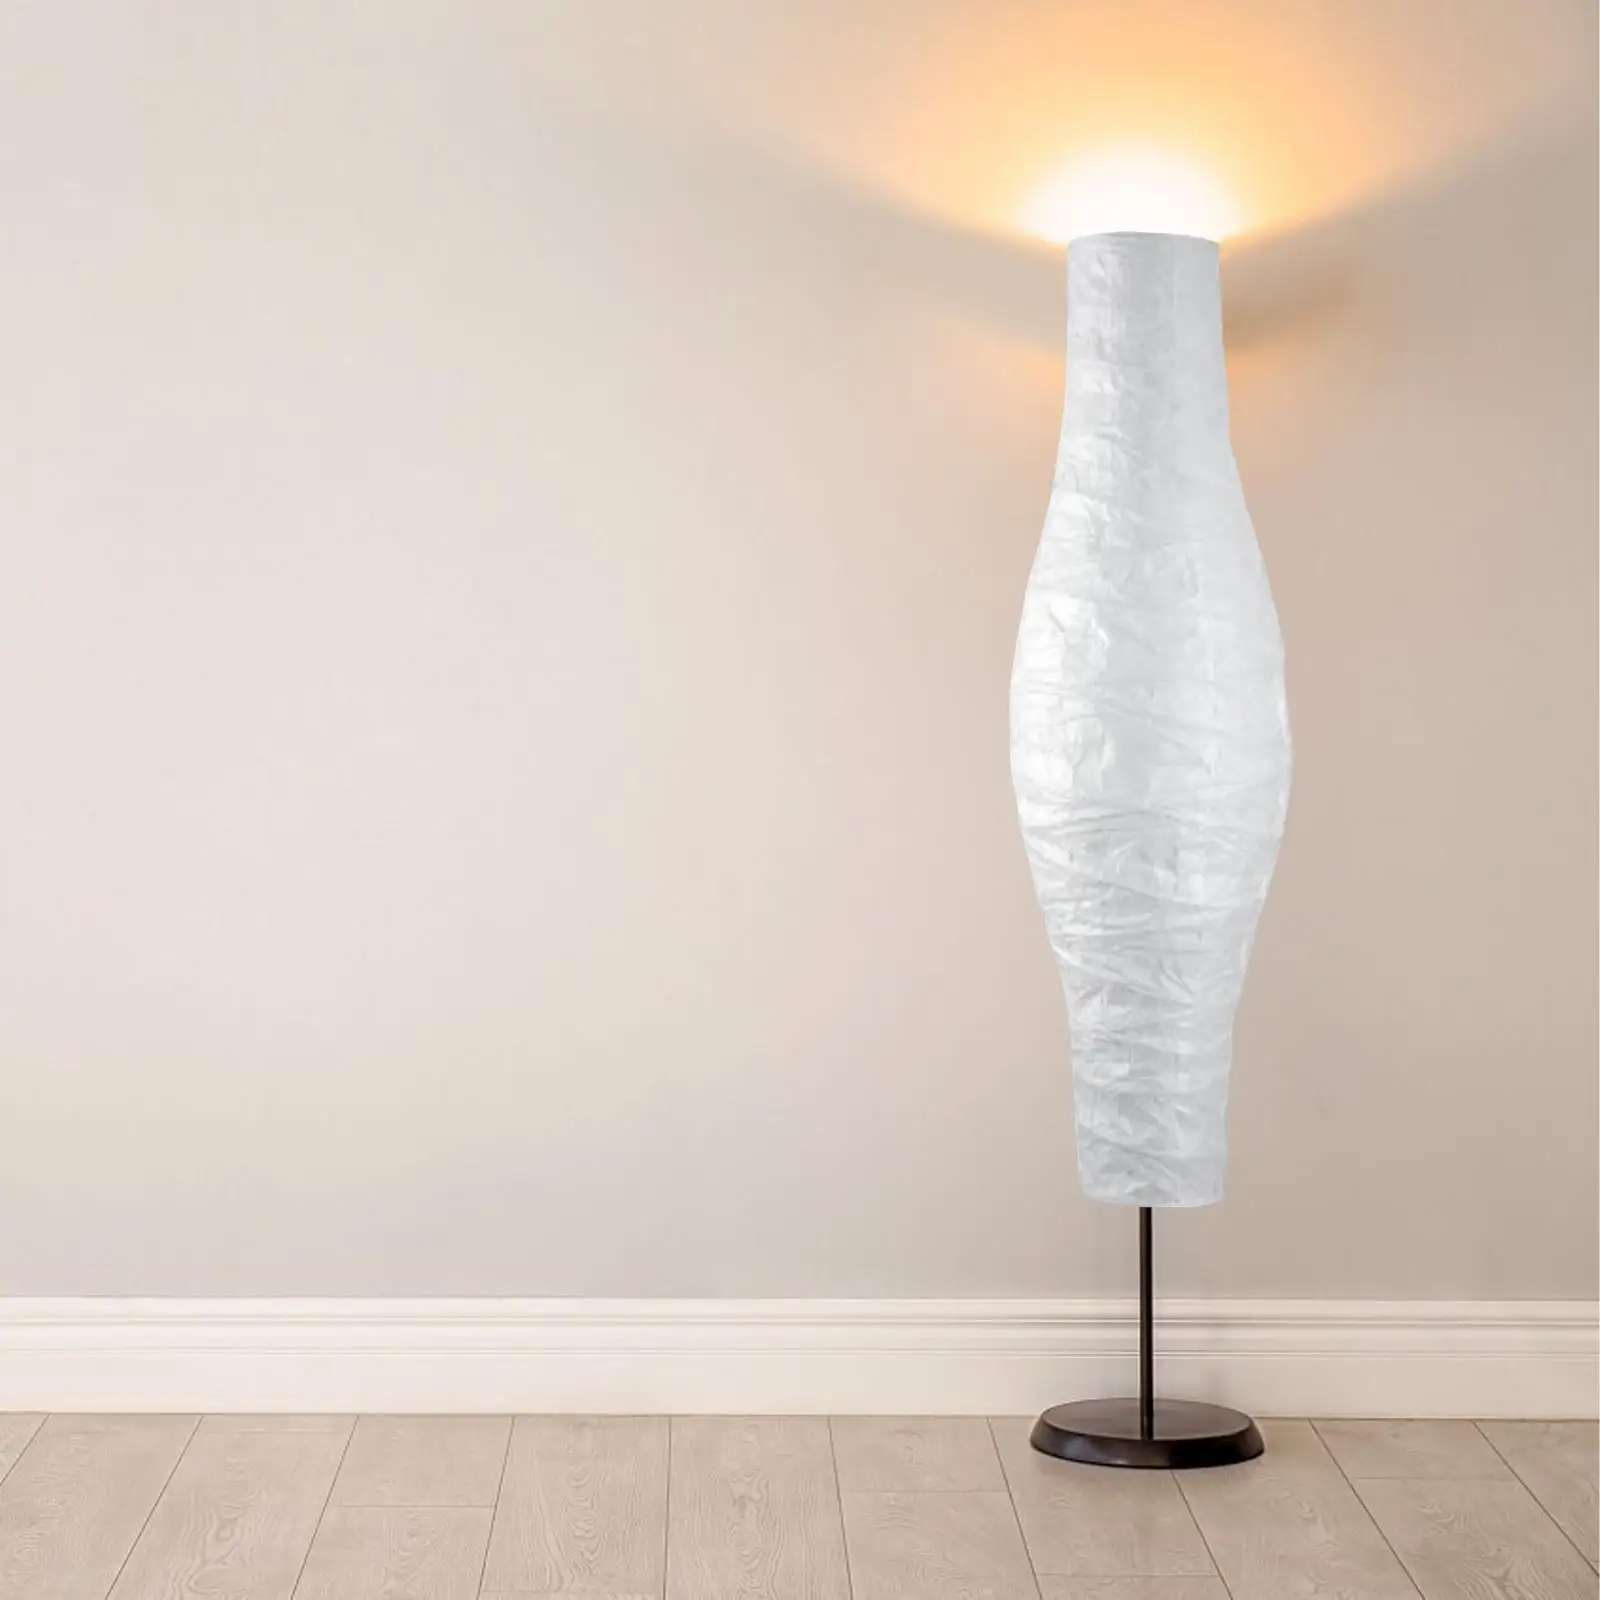 Rice Paper Floor Lamp Shade, Standing Corner Lamp Cover Decor 46in Tall Nordic